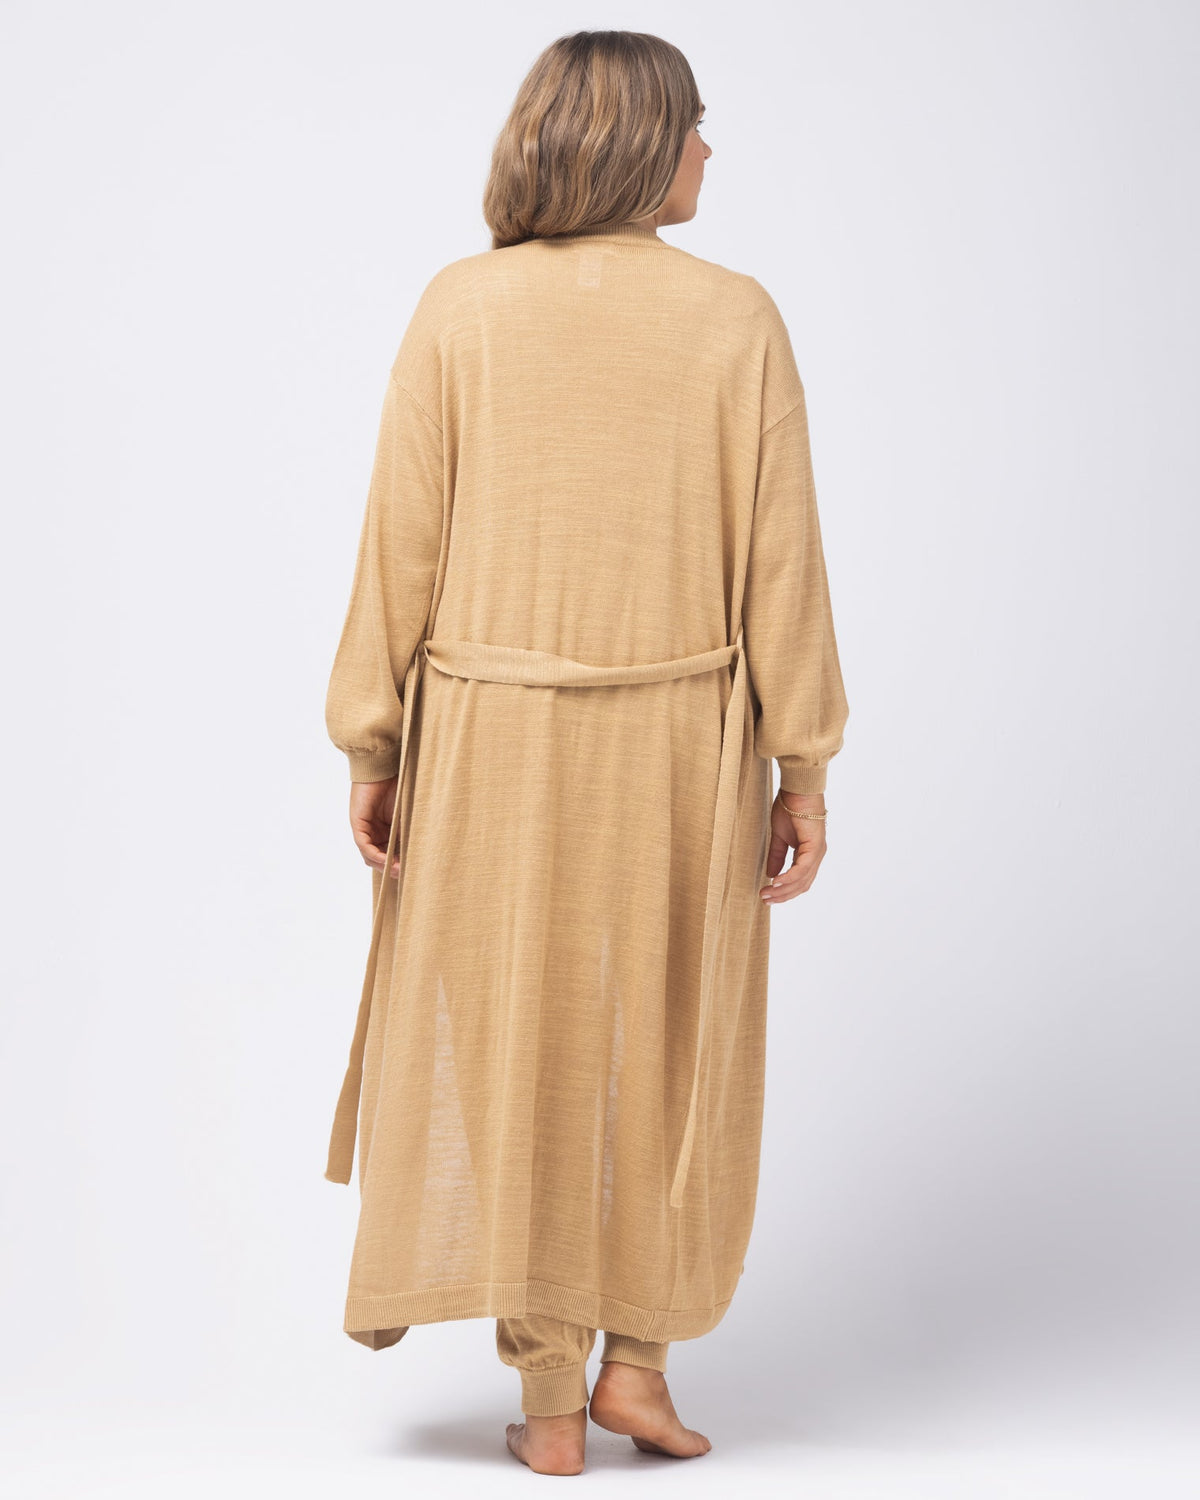 Azores Duster Toffee | Model: Ali (size: XL)